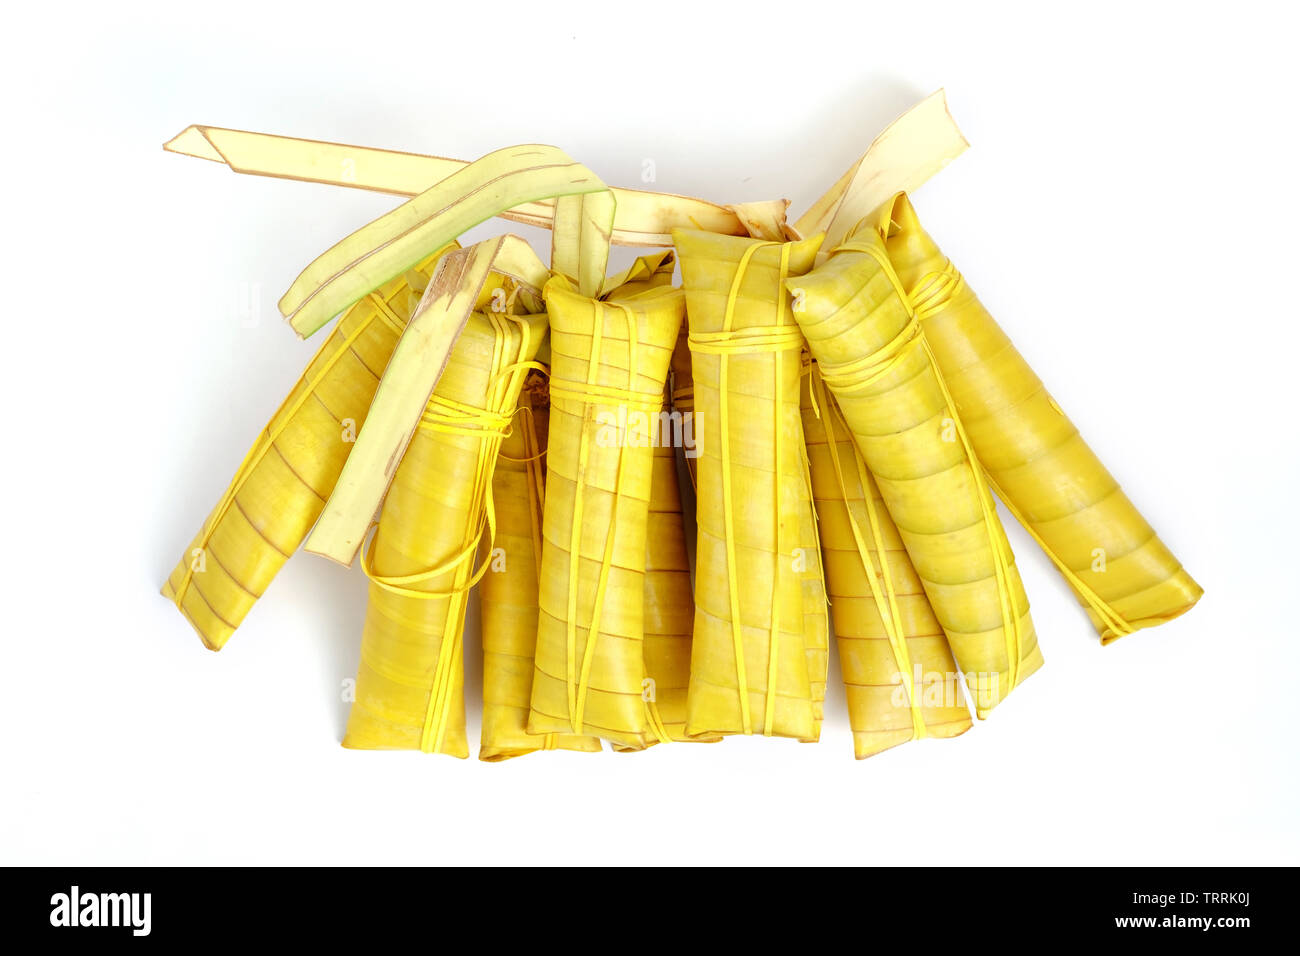 Suman sa Ibos, a traditional sticky rice cake wrapped in buli leaves on white background Stock Photo